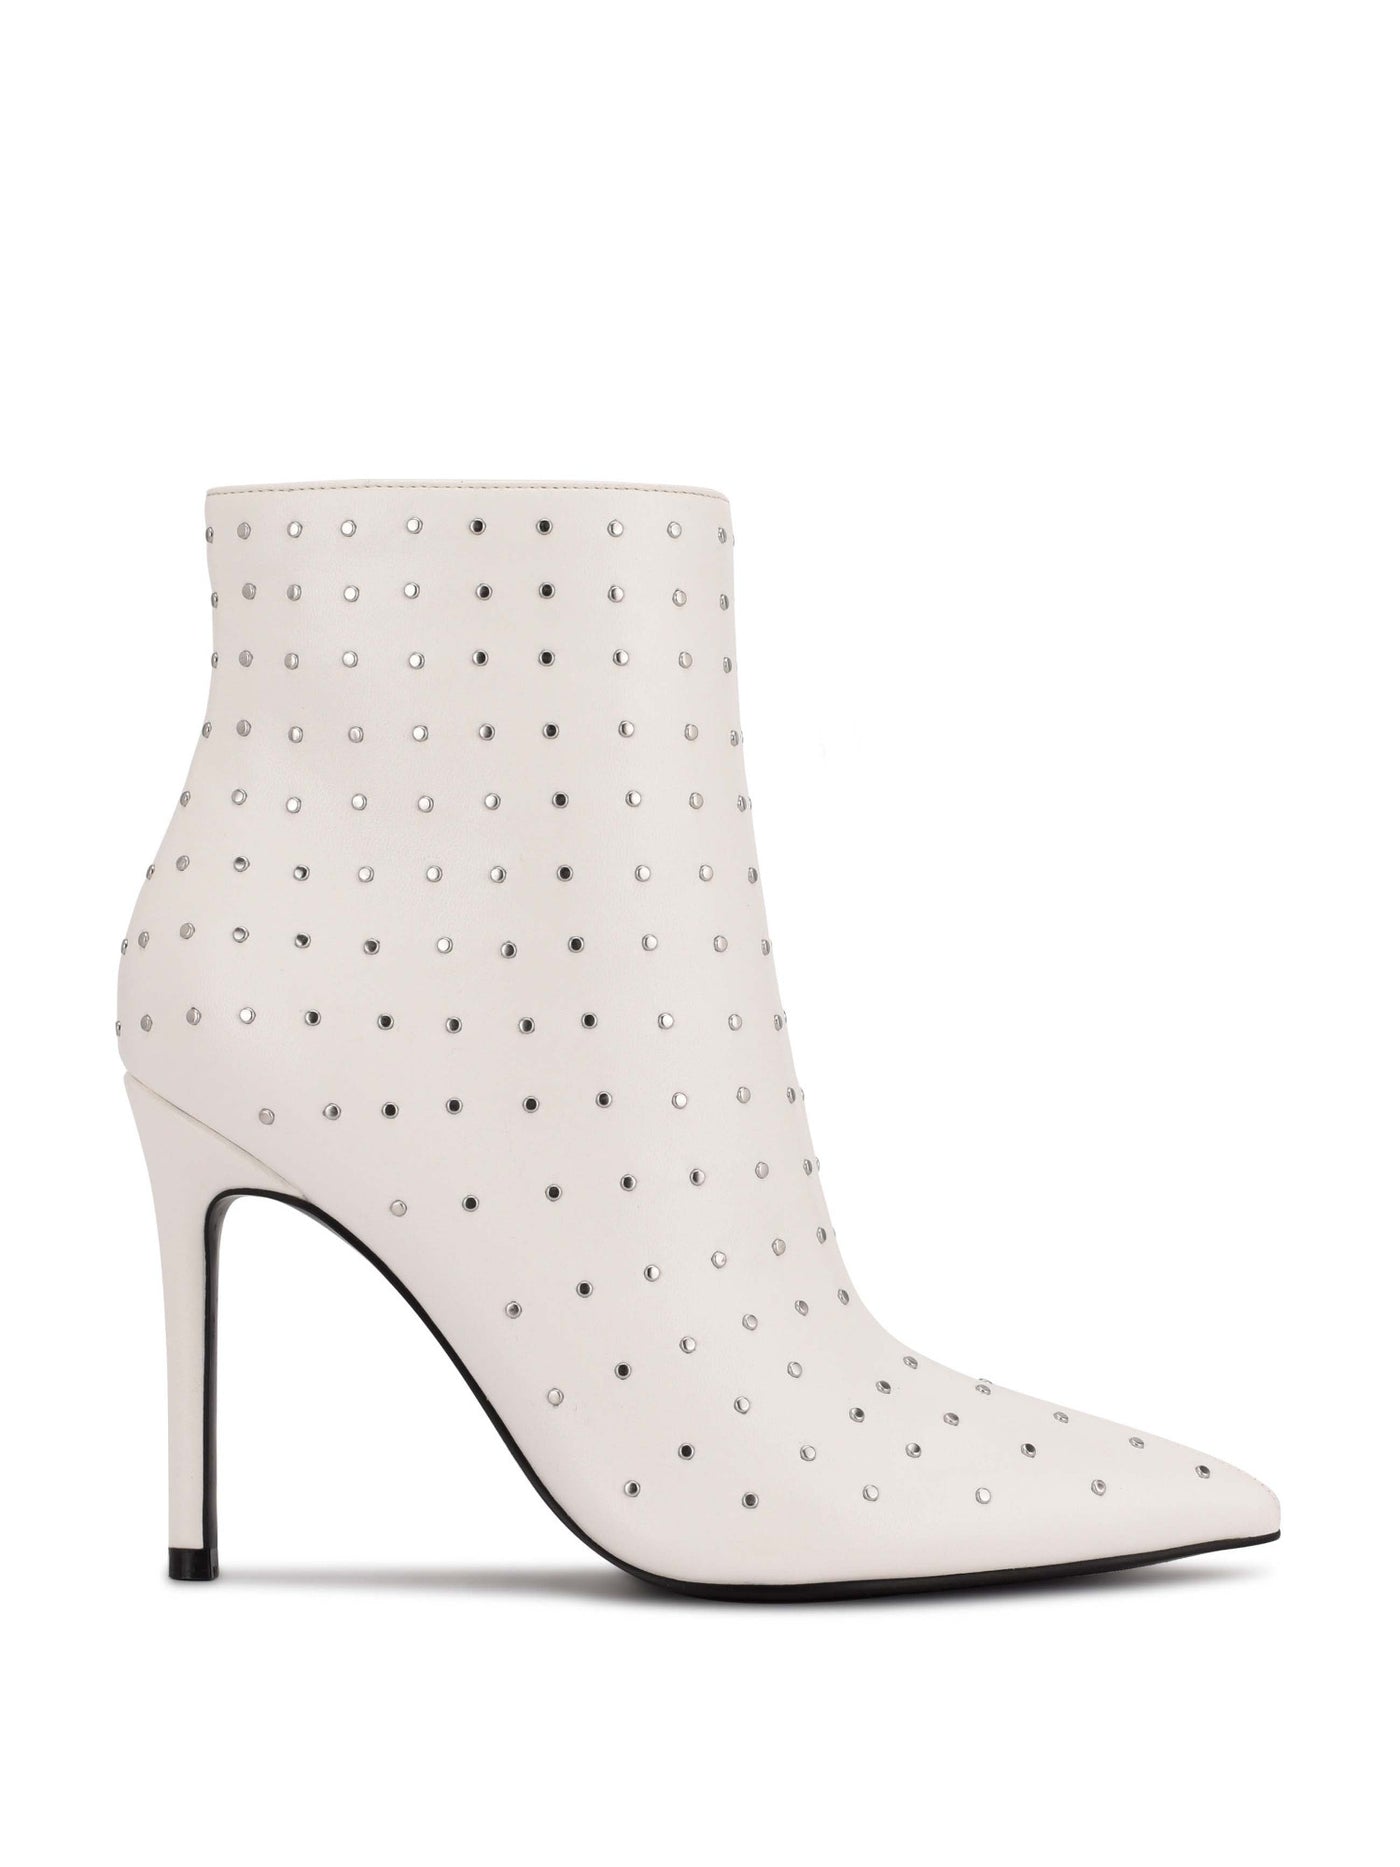 NINE WEST Womens White Studded Padded Farrah Pointy Toe Stiletto Zip-Up Dress Booties 10 M